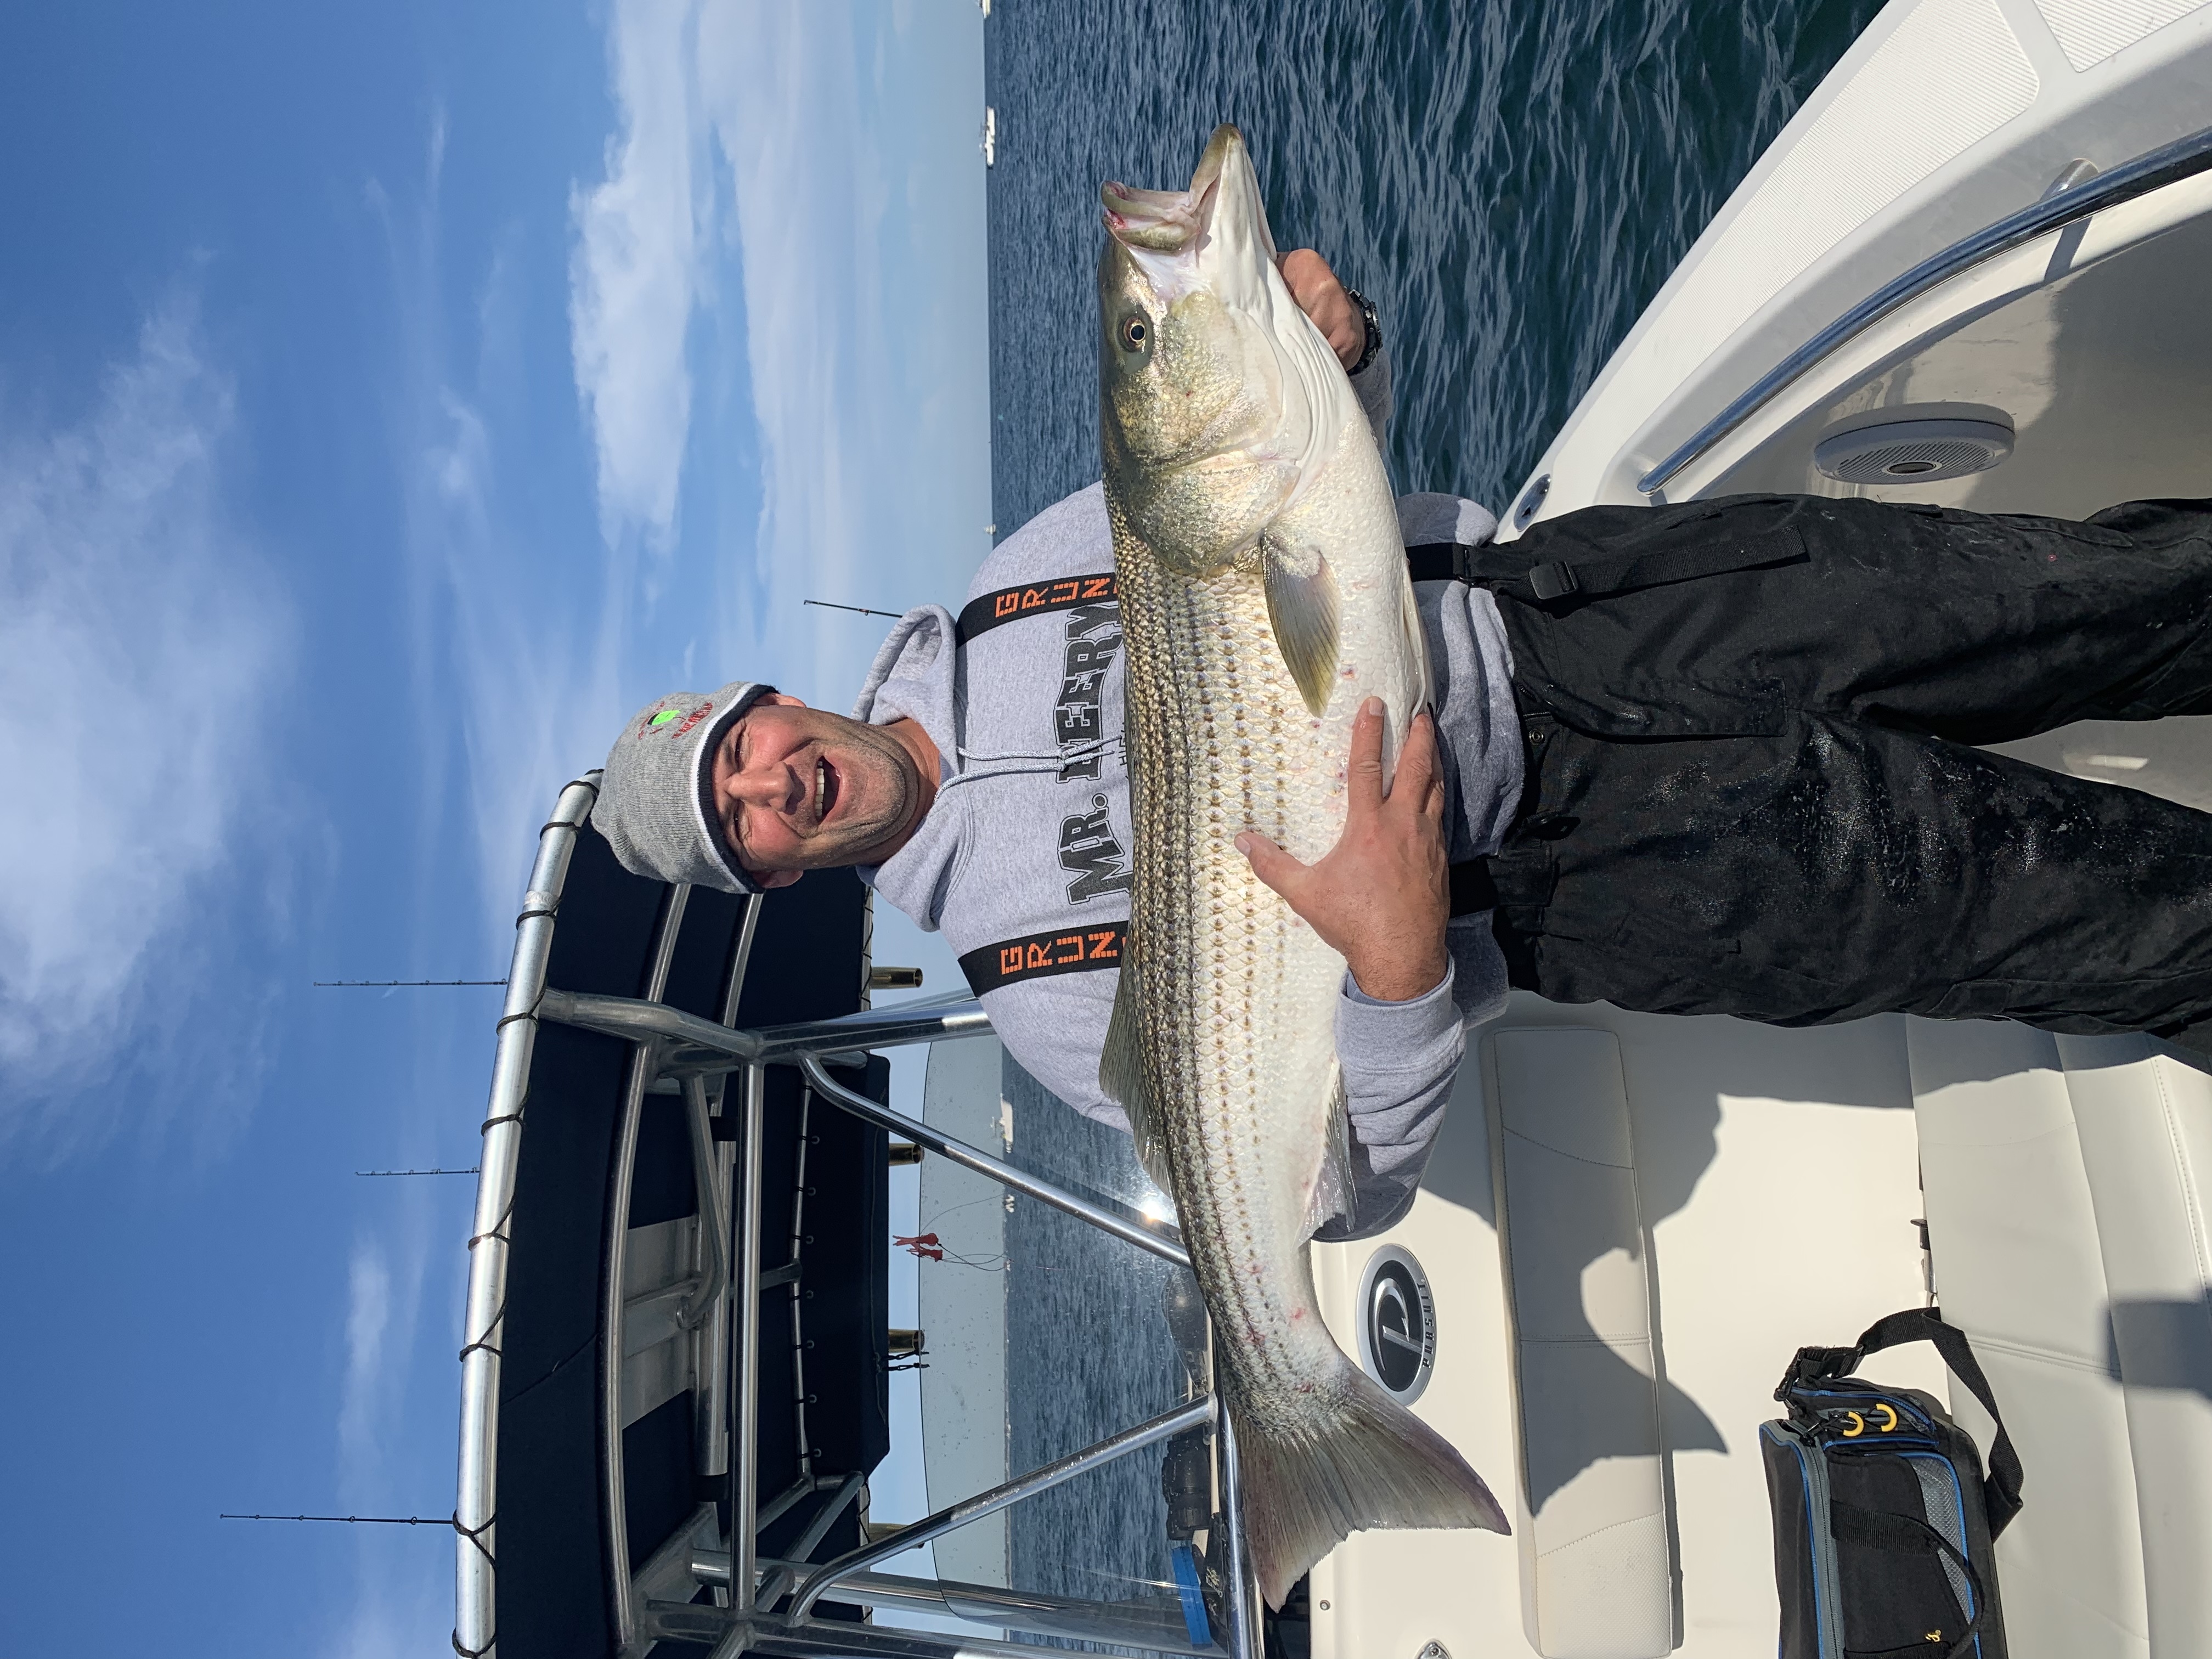 Chris Capalbo and a lot of anglers stumbled onto red-hot fishing for big striped bass outside Shinnecock Inlet over the weekend.